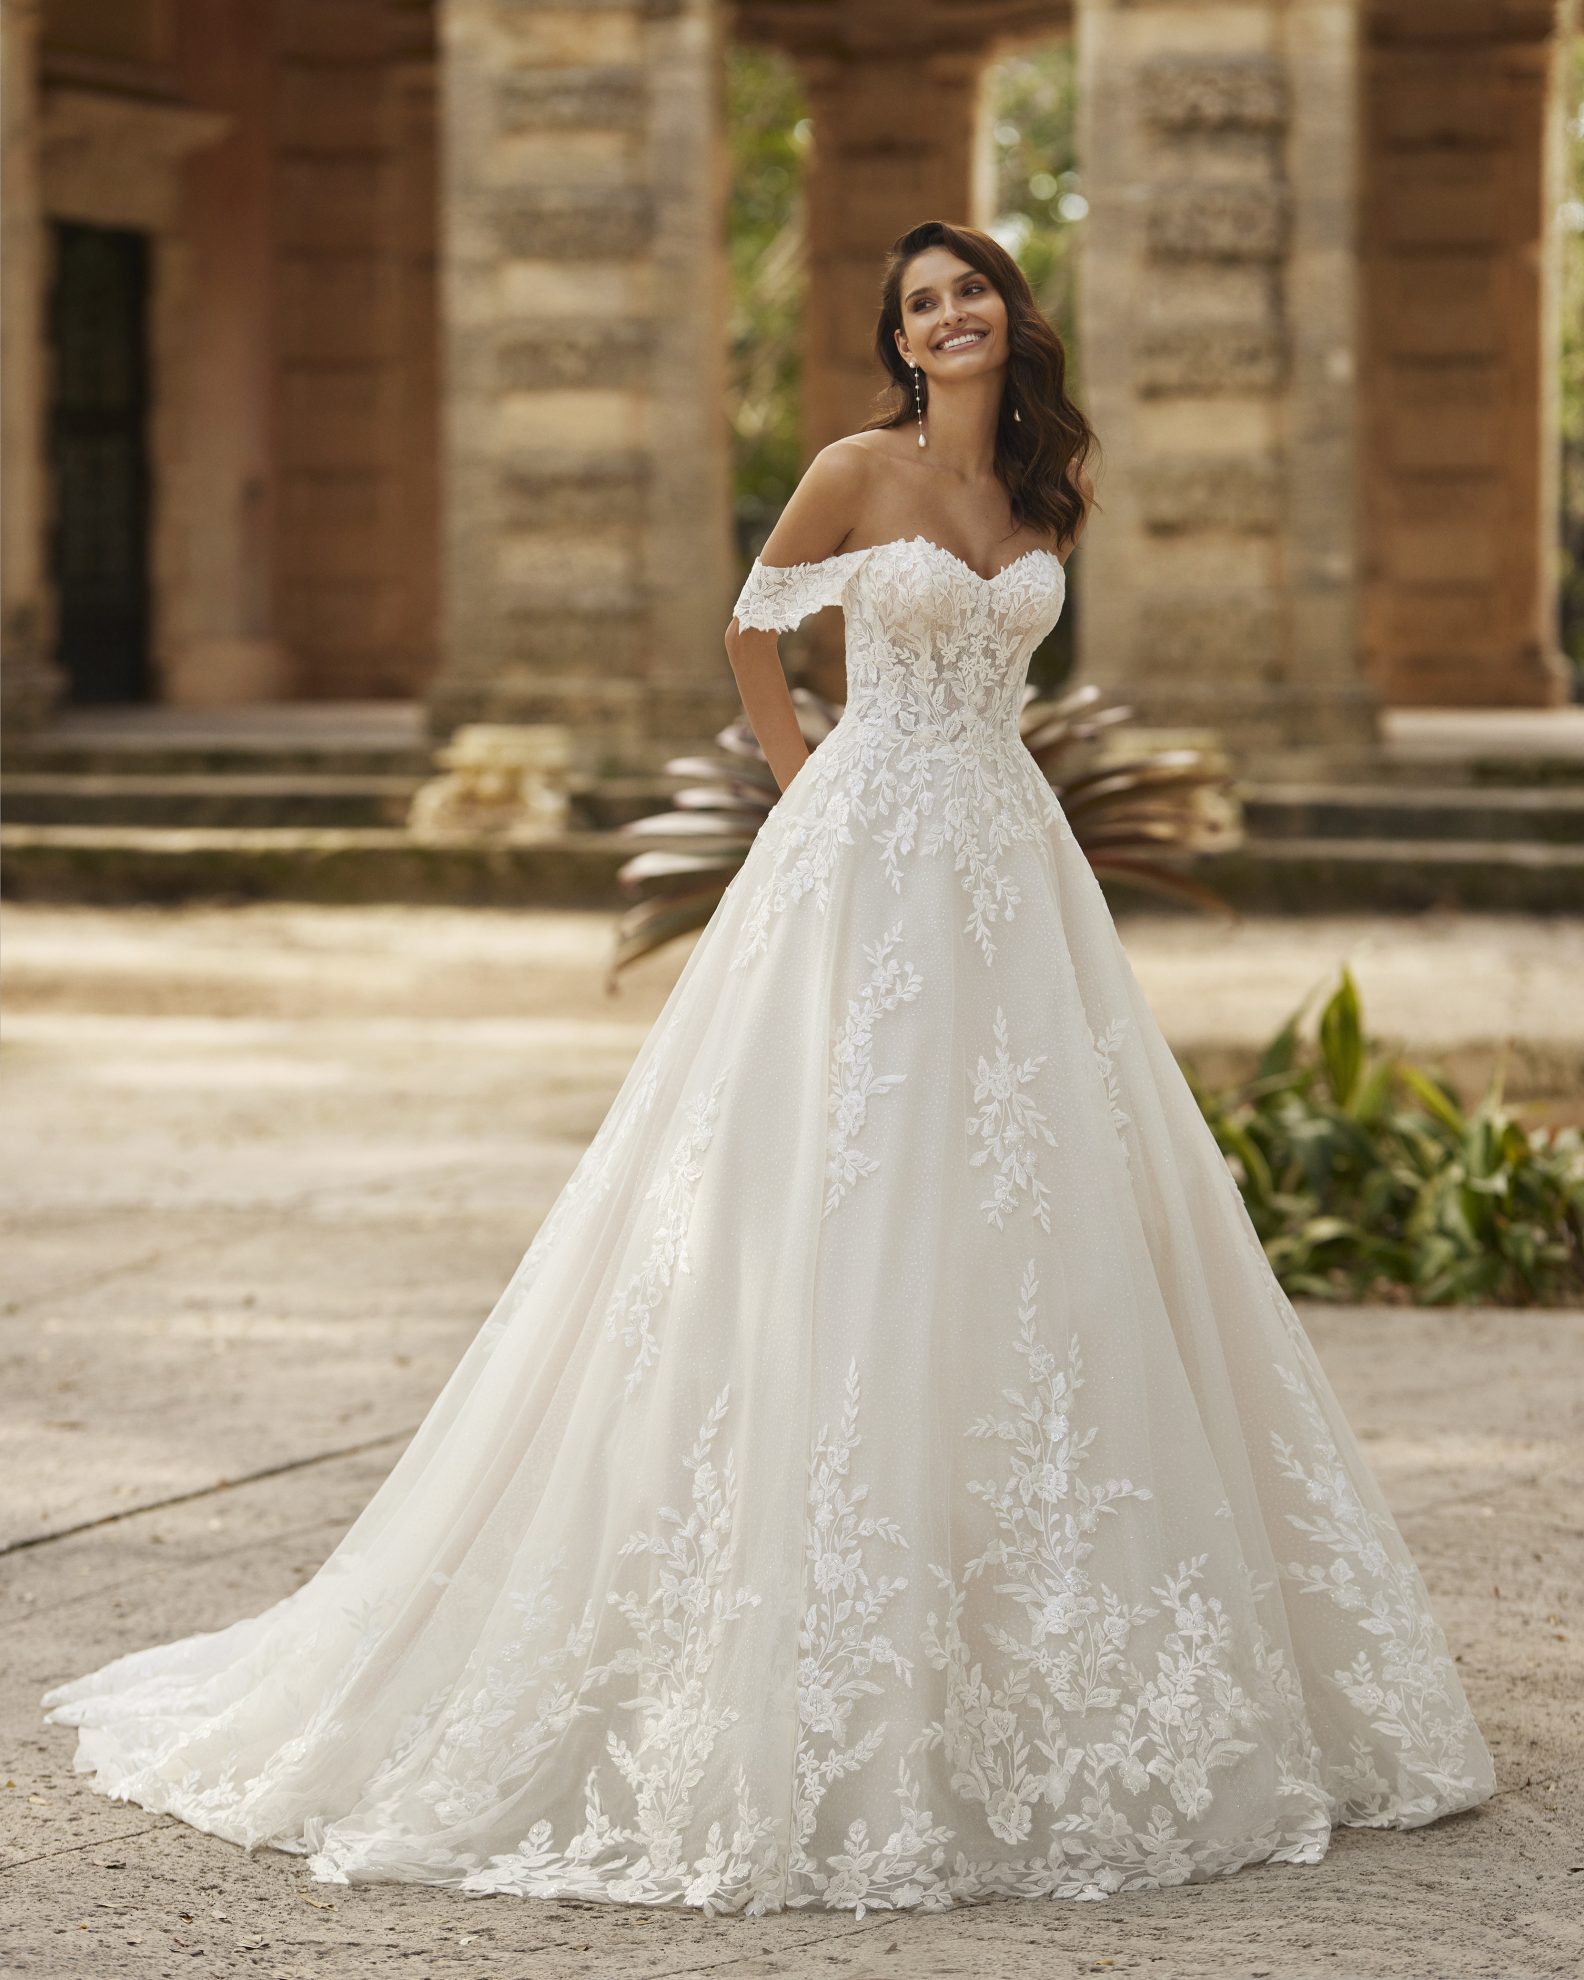 Detchable sleeves are a romantic addition on this ballgown